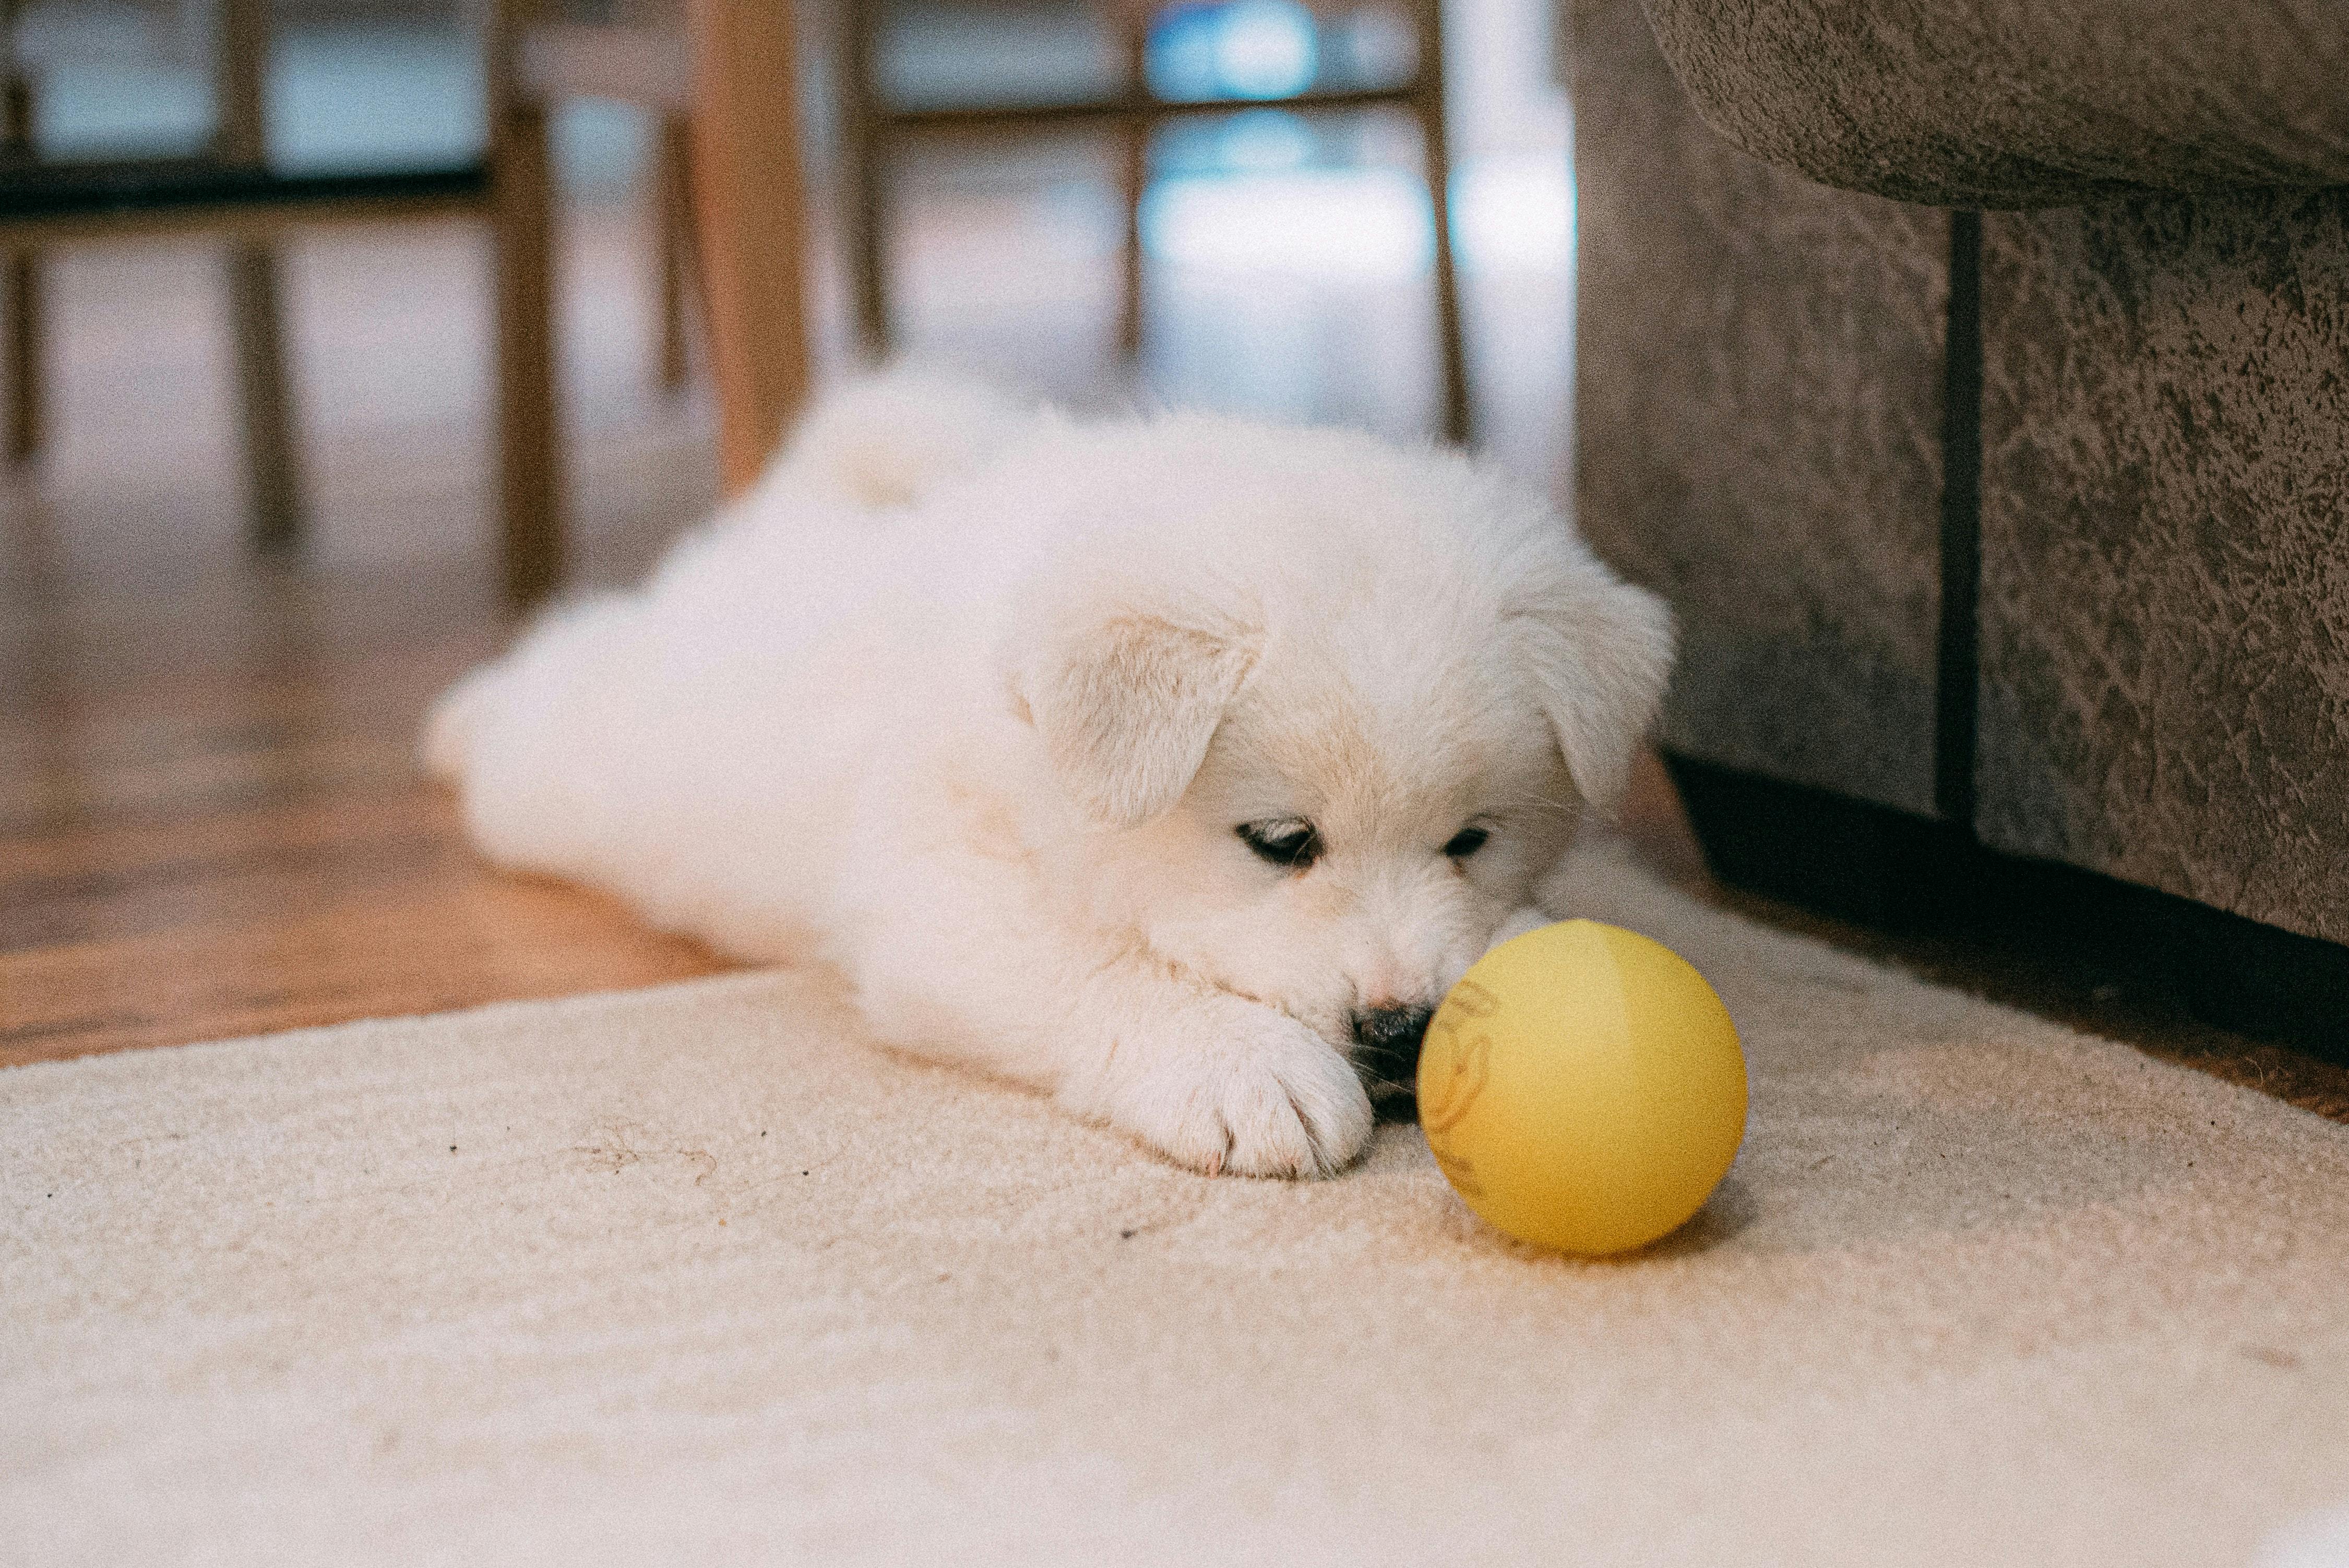 A puppy looks at a yellow ball while laying down on the floor